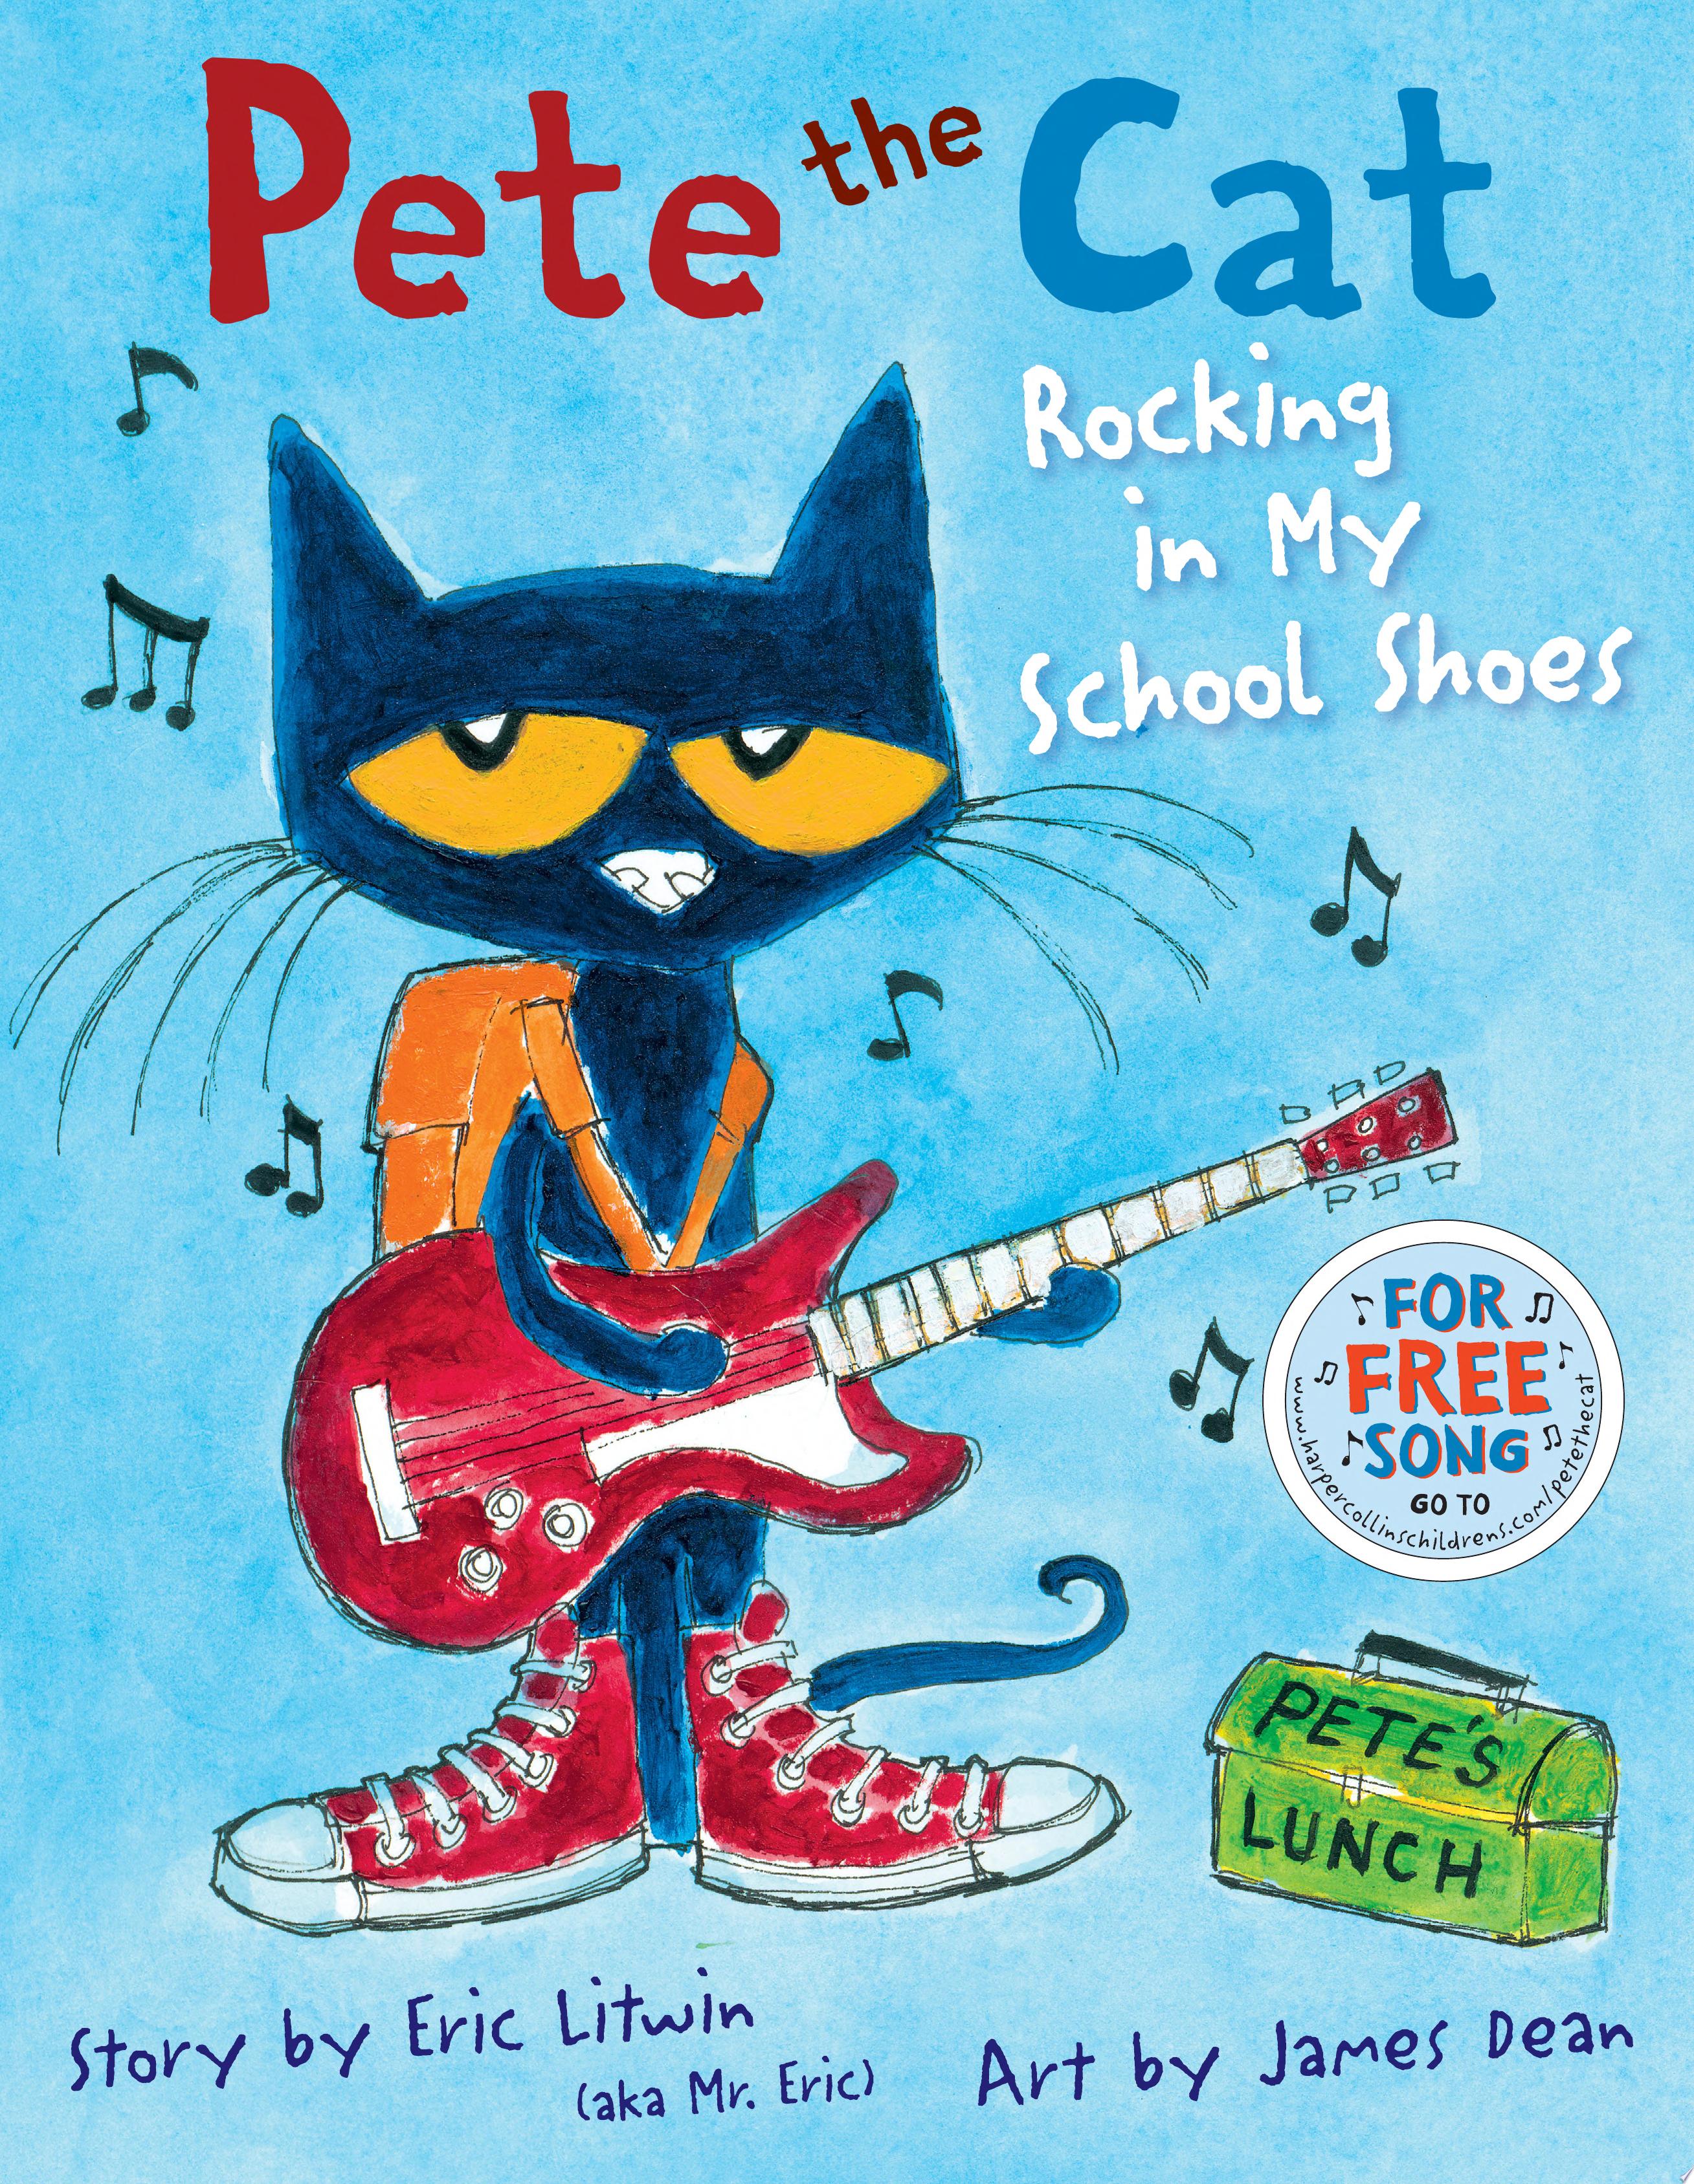 Image for "Pete the Cat: Rocking in My School Shoes"